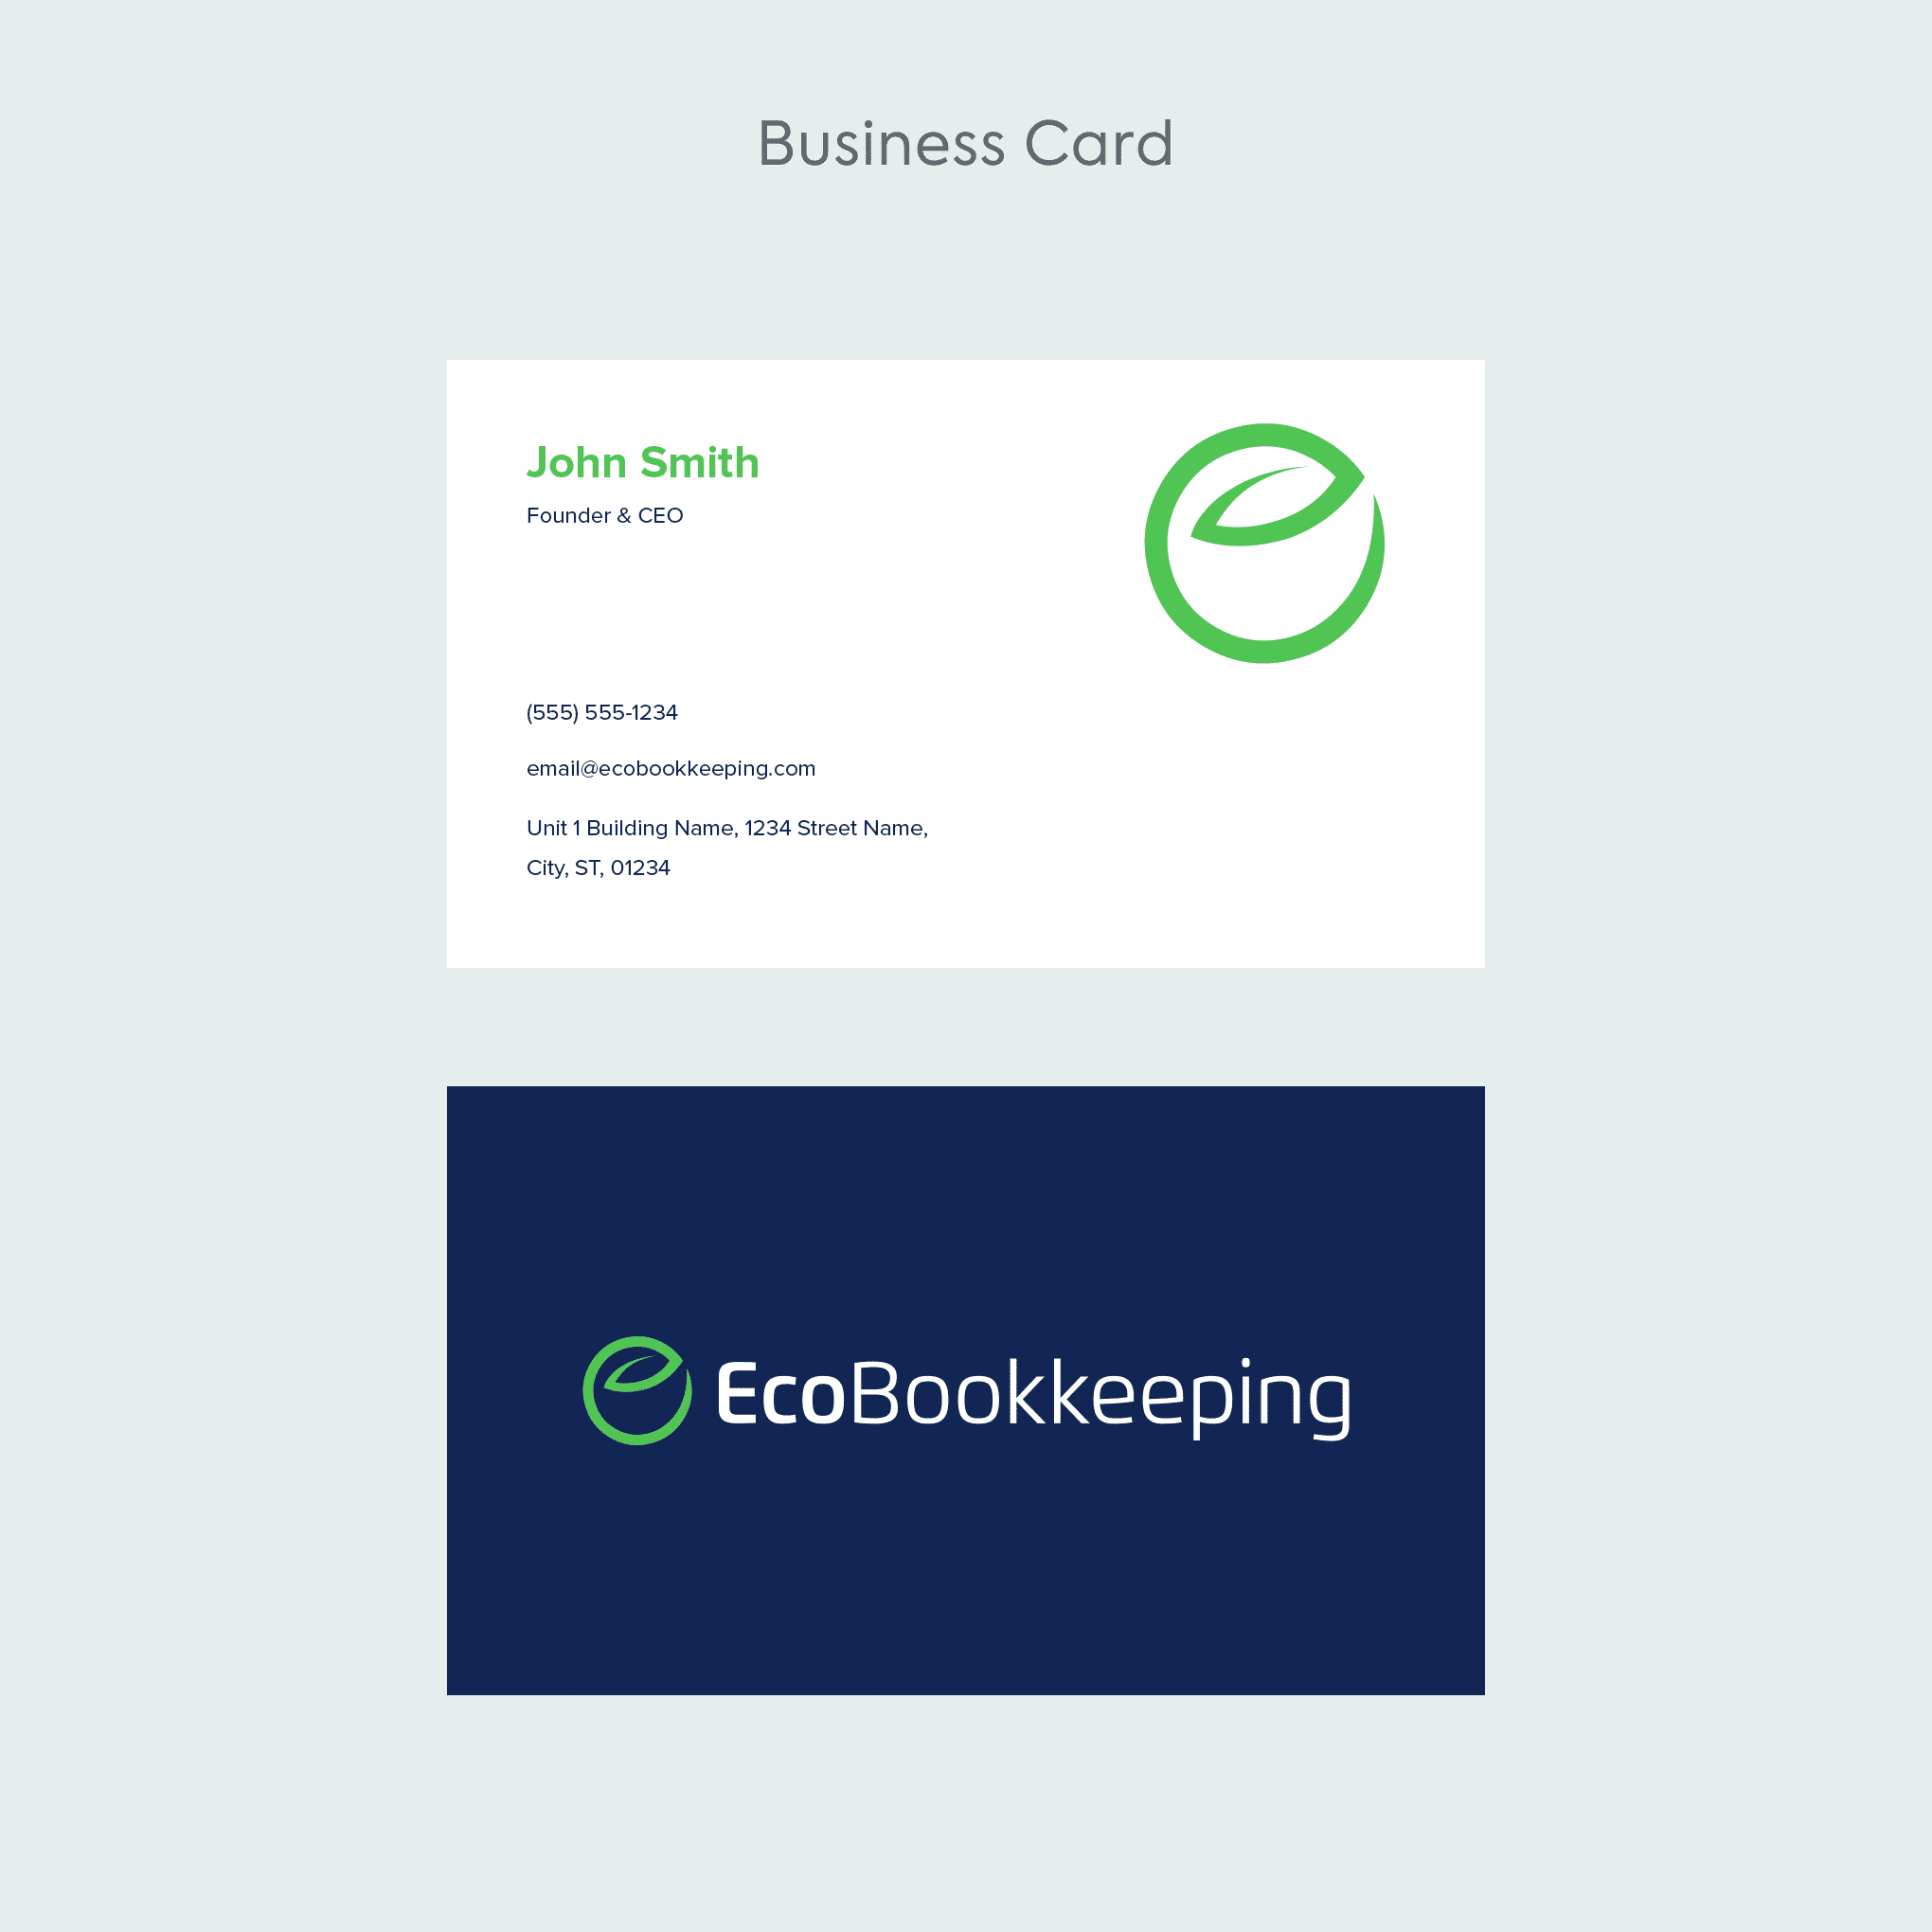 04 - Business Card Template (8)